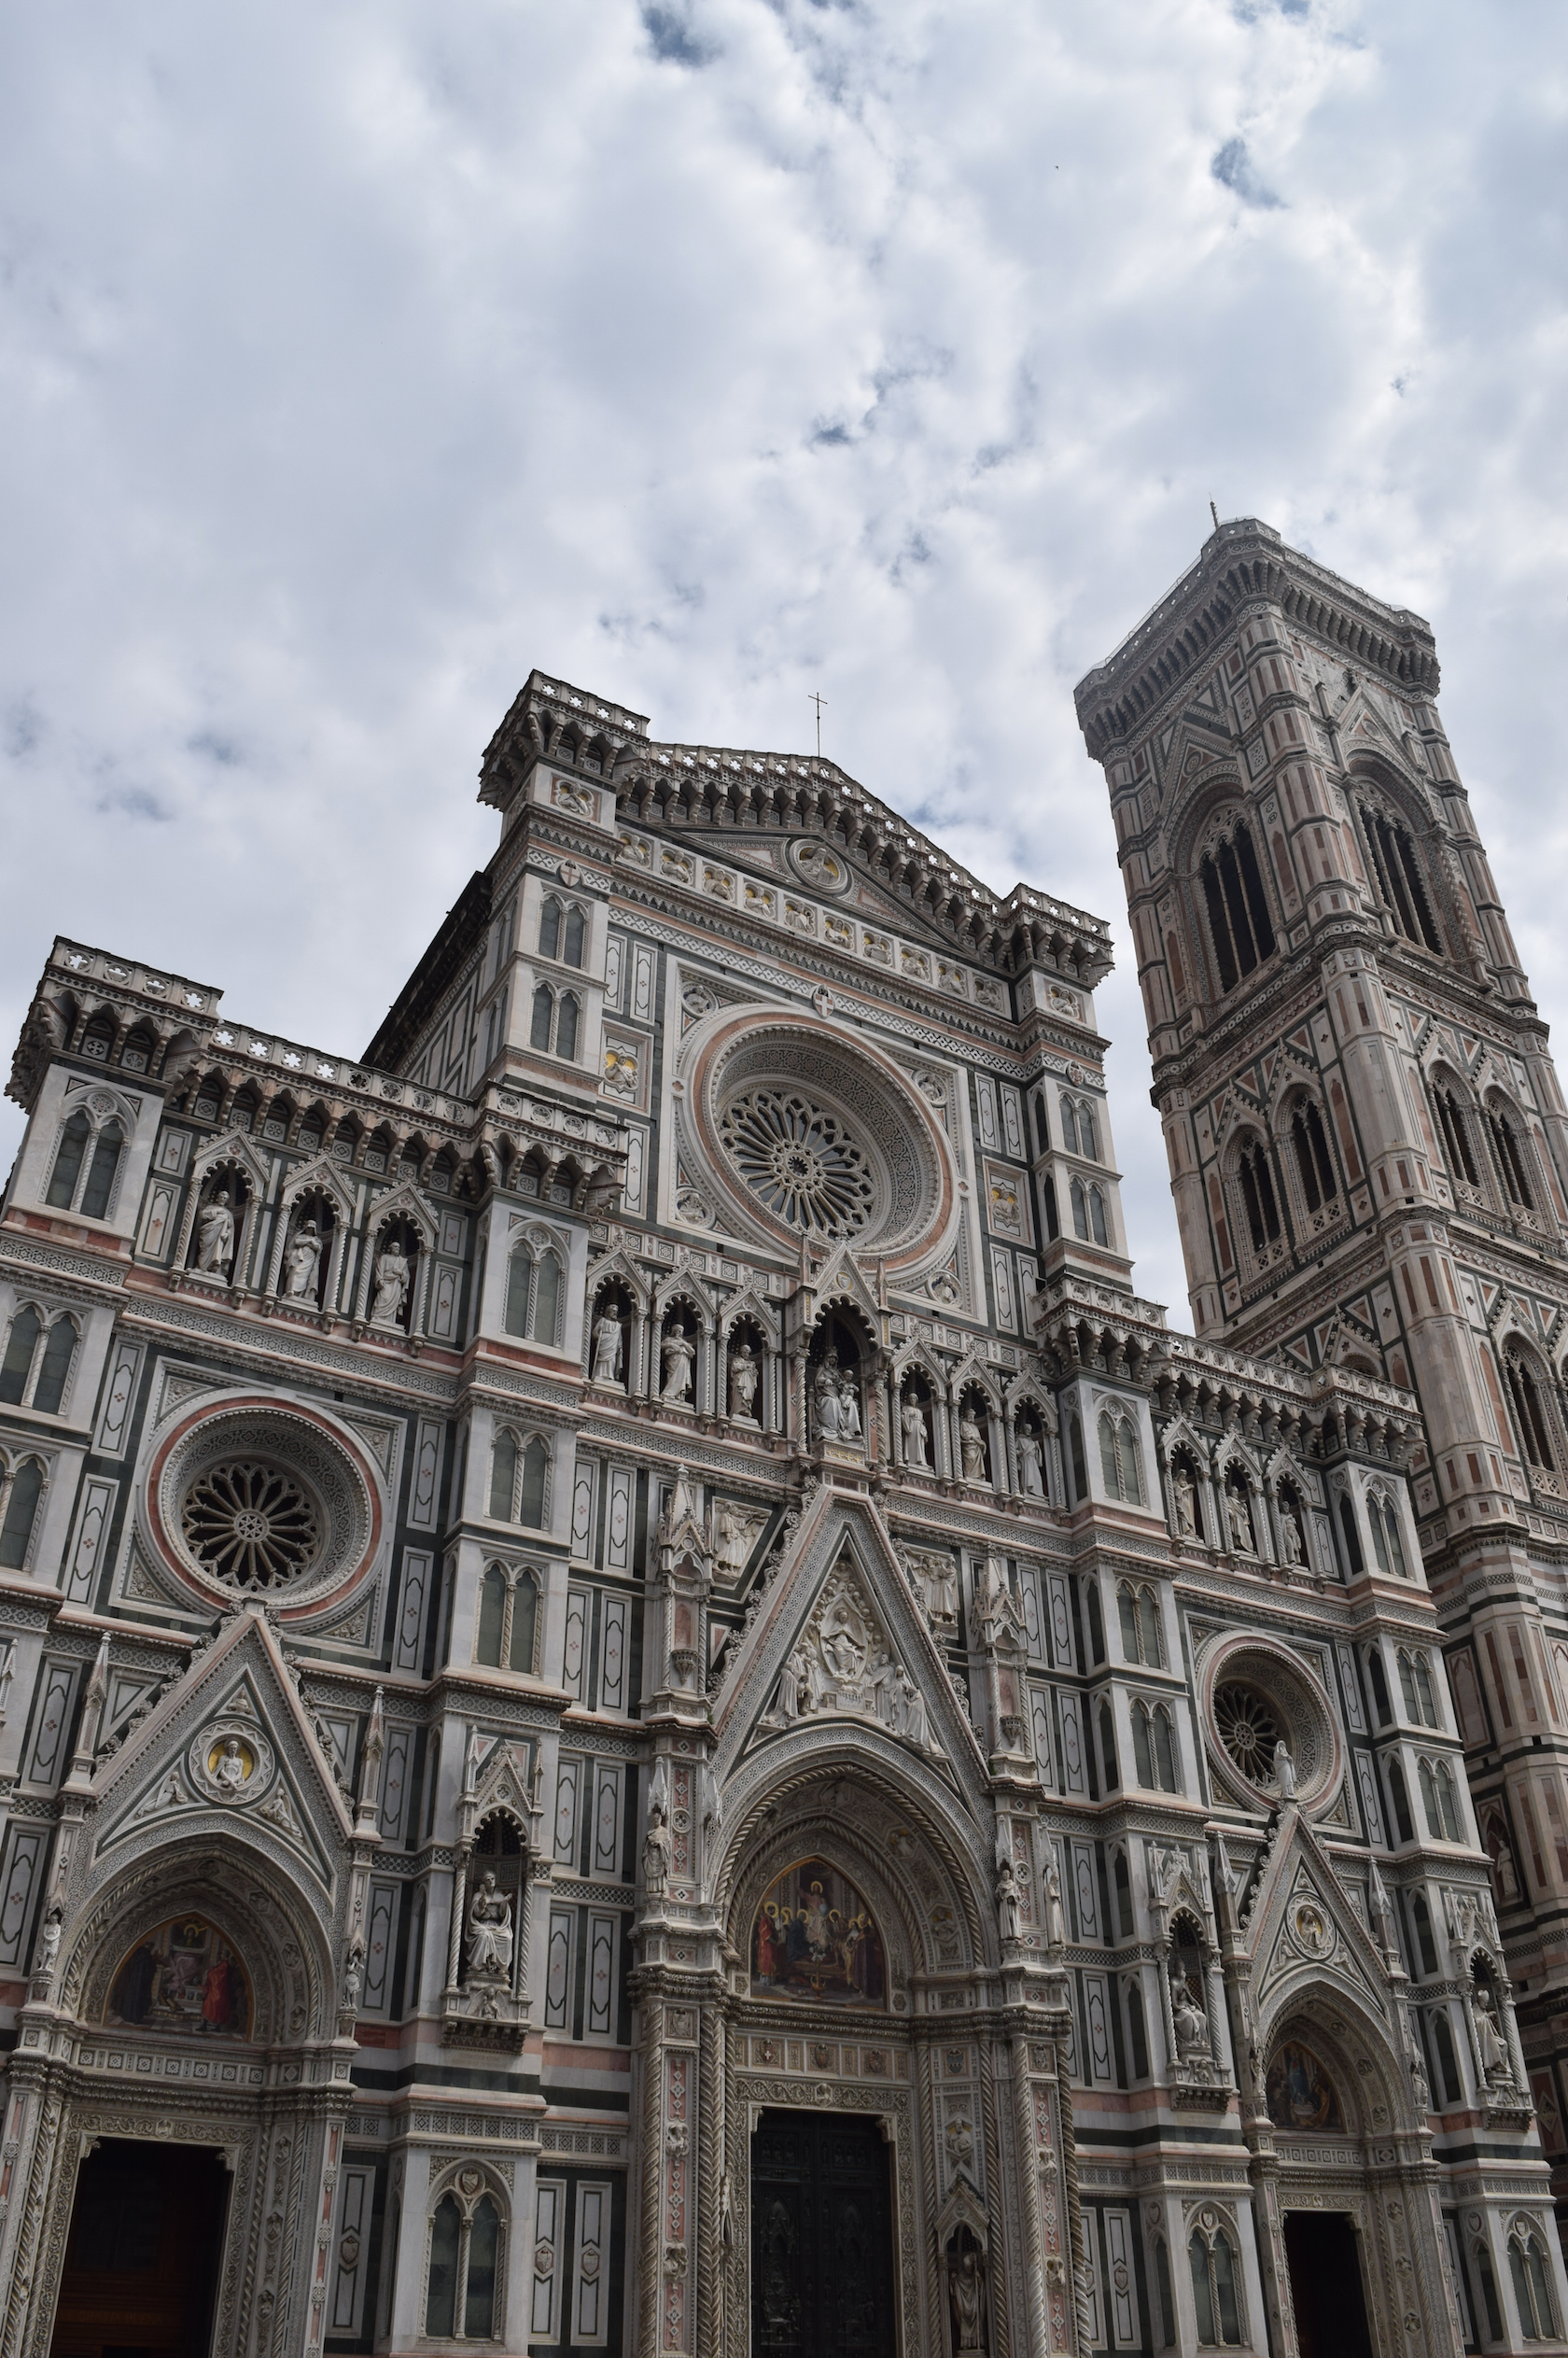 3 Days In Florence - Florence Italy - Planning a trip to Italy - Italy Itinerary - Florence - Tuscany - What to do in Florence - What to do in Italy - Where to go in Florence - Climbing the Duomo - Seeing The David - Best Tips for Florence Italy Travel - Communikait by Kait Hanson